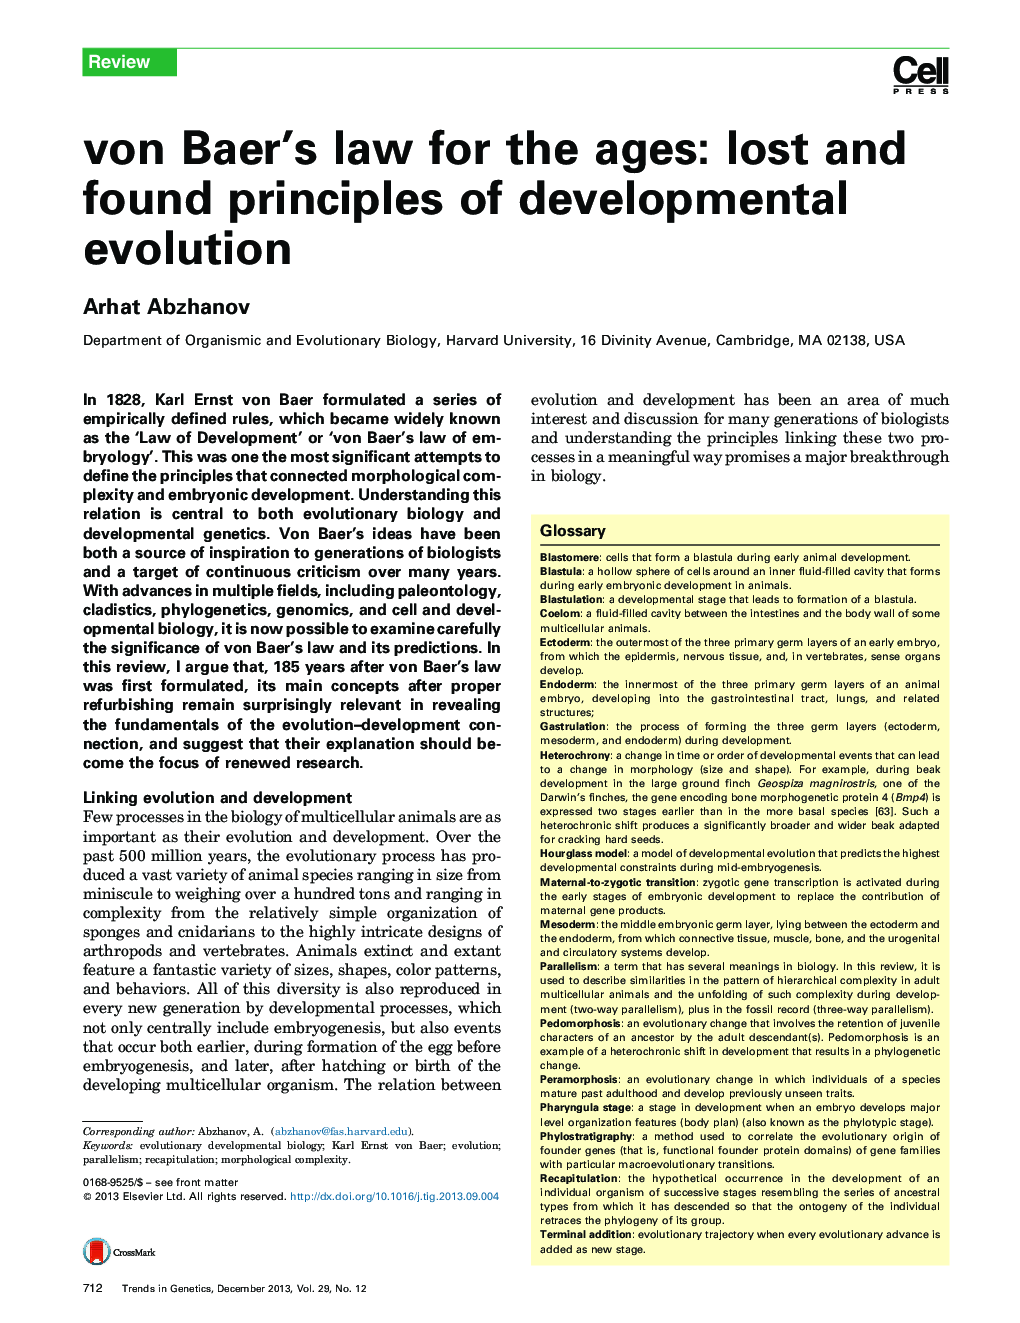 von Baer's law for the ages: lost and found principles of developmental evolution